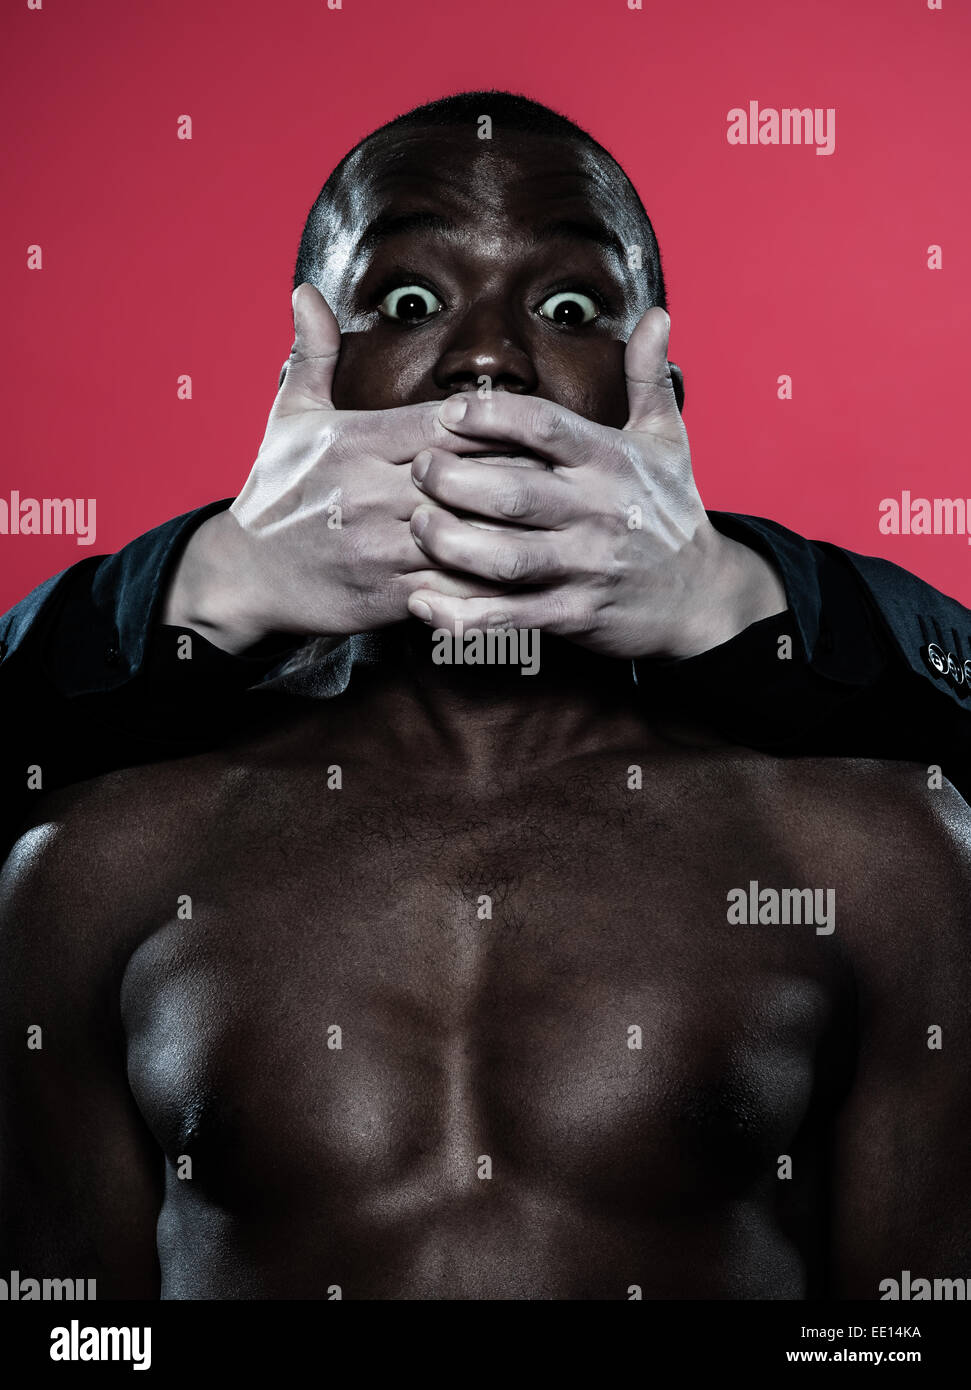 one african man hand on his mouth Freedom of speech concept Stock Photo